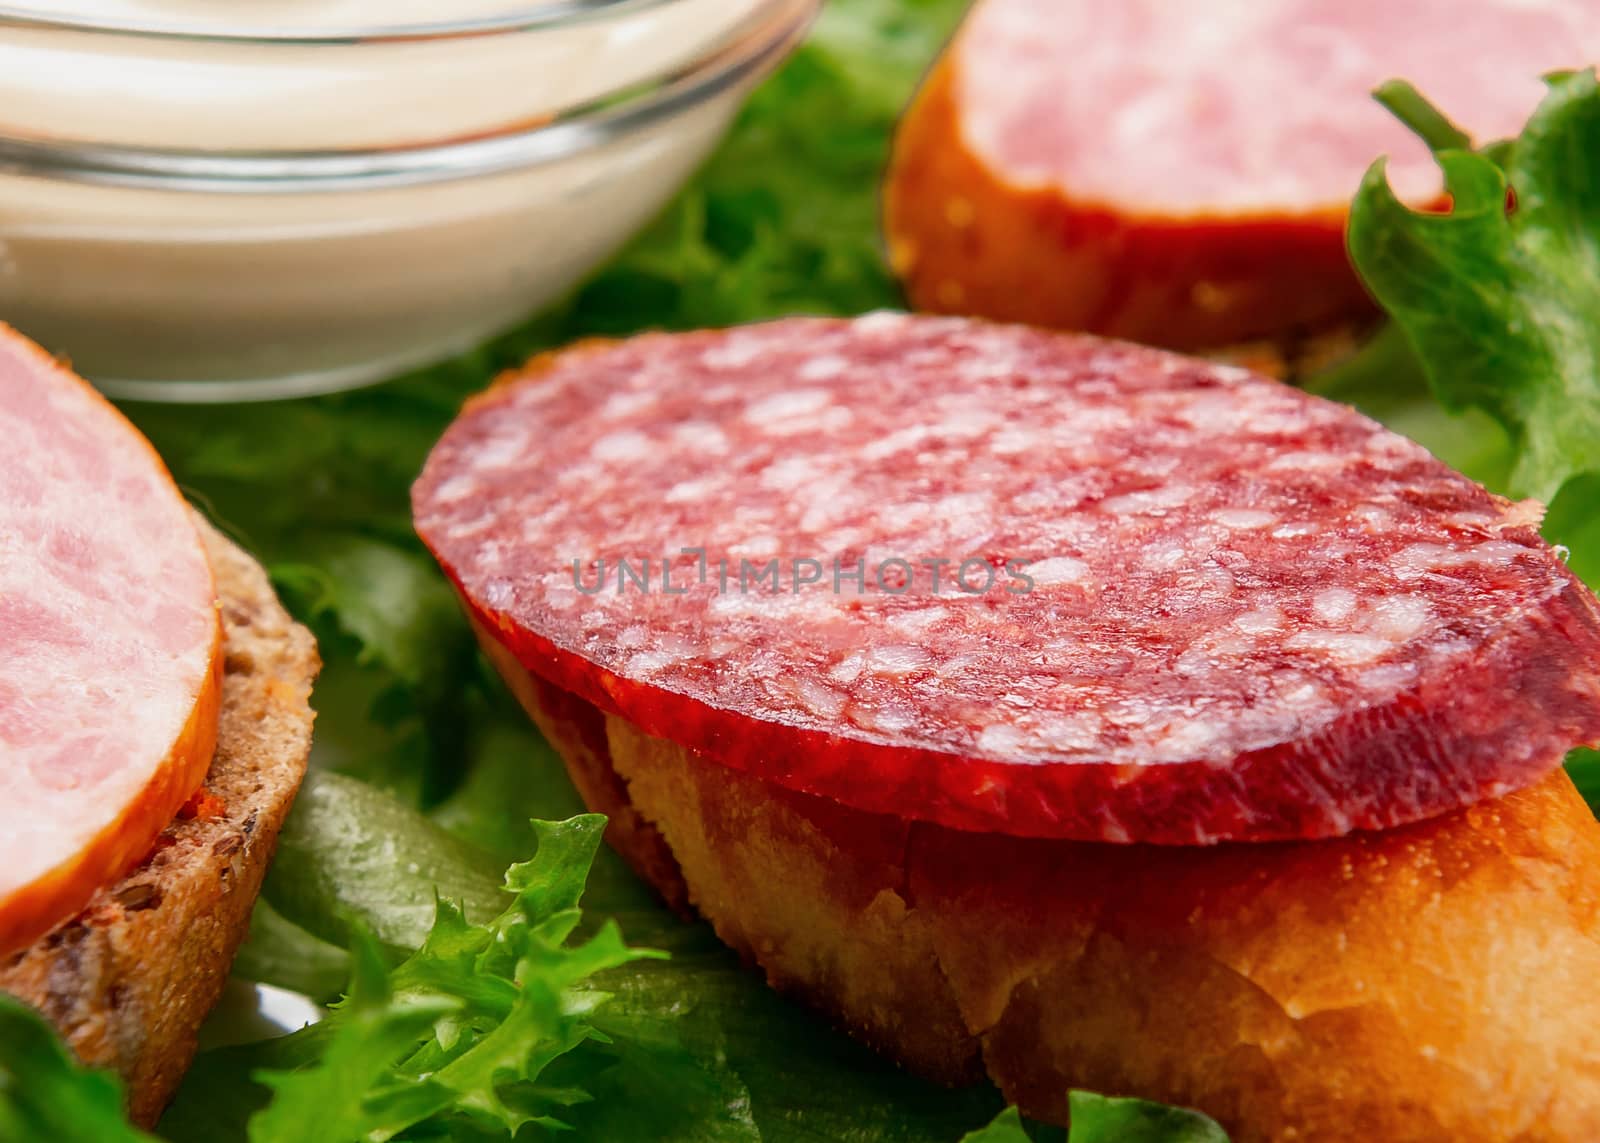 Several sandwiches with sausage and salami and sauce on a plate, close up.